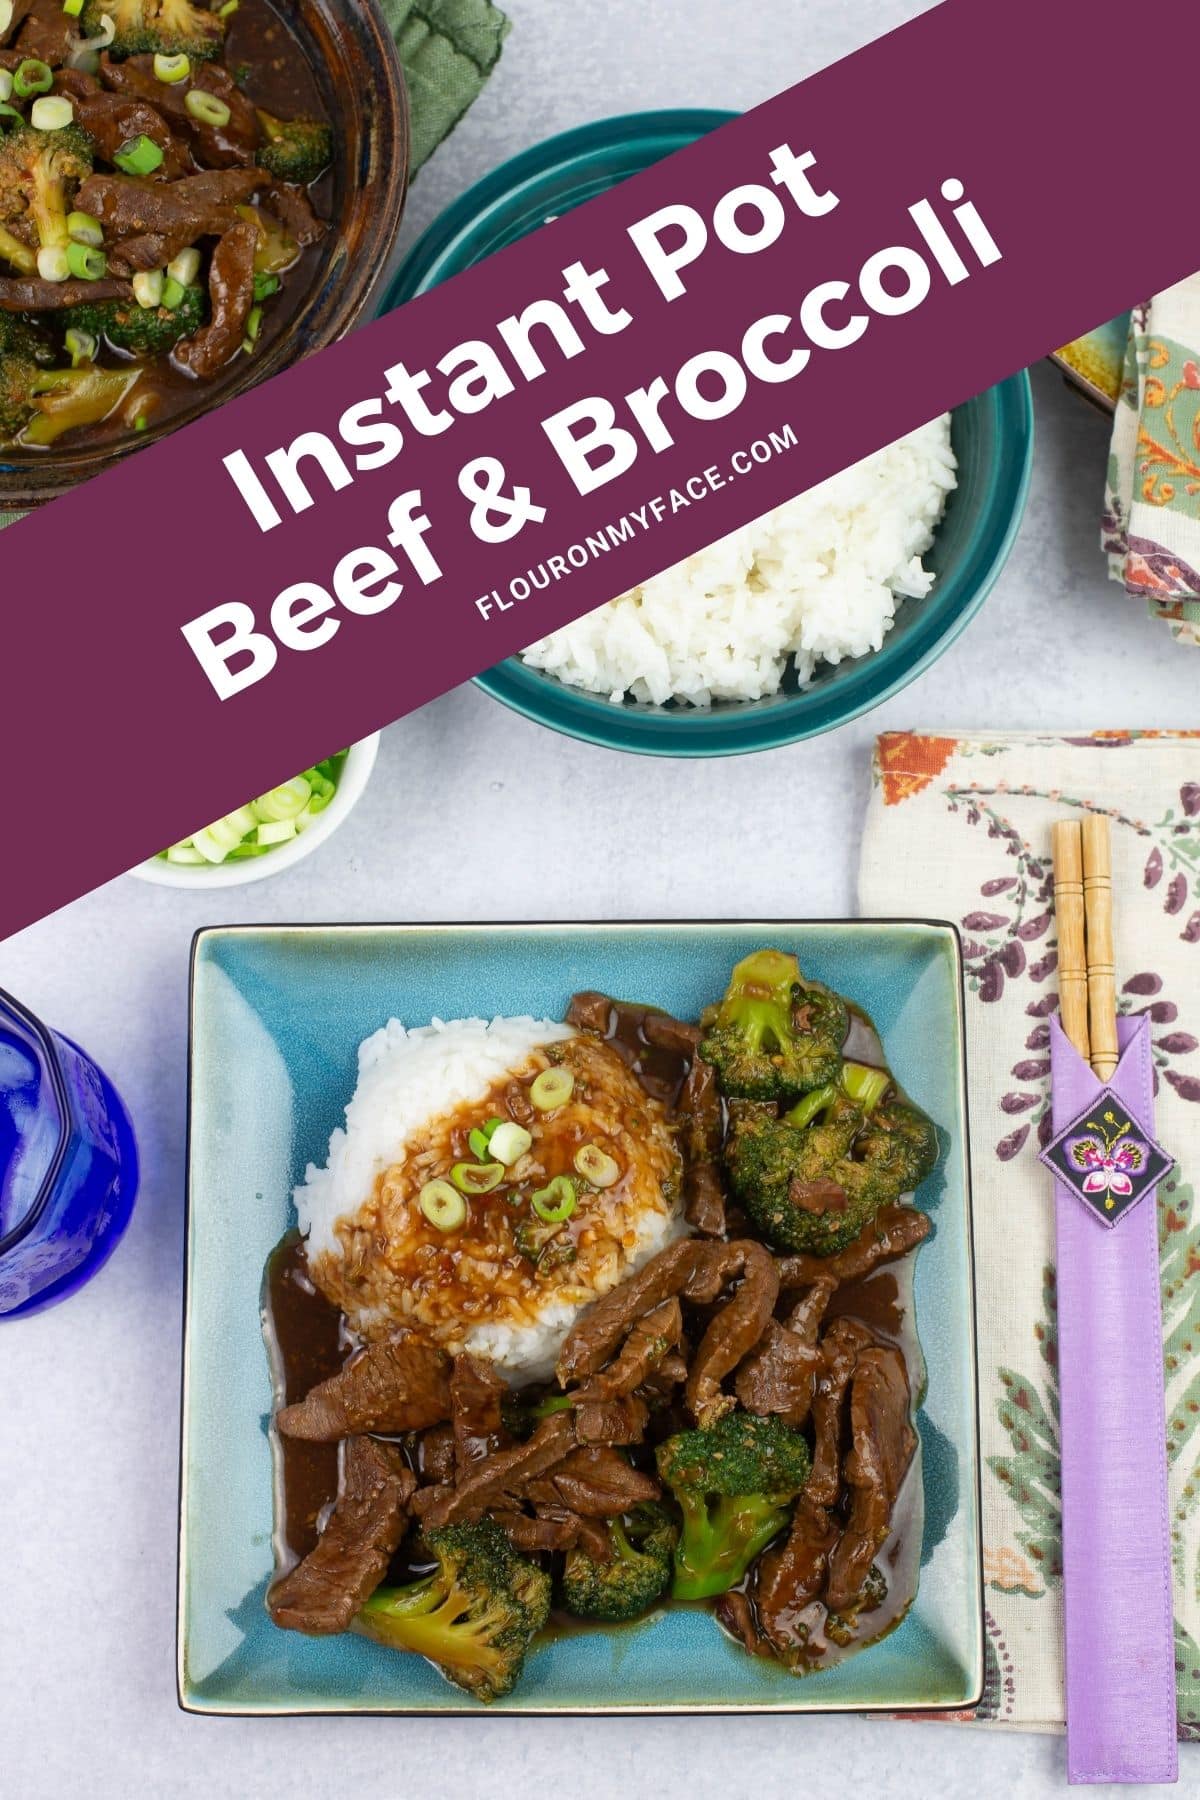 Image of Instant Pot Beef and Broccoli served with a bed of rice.